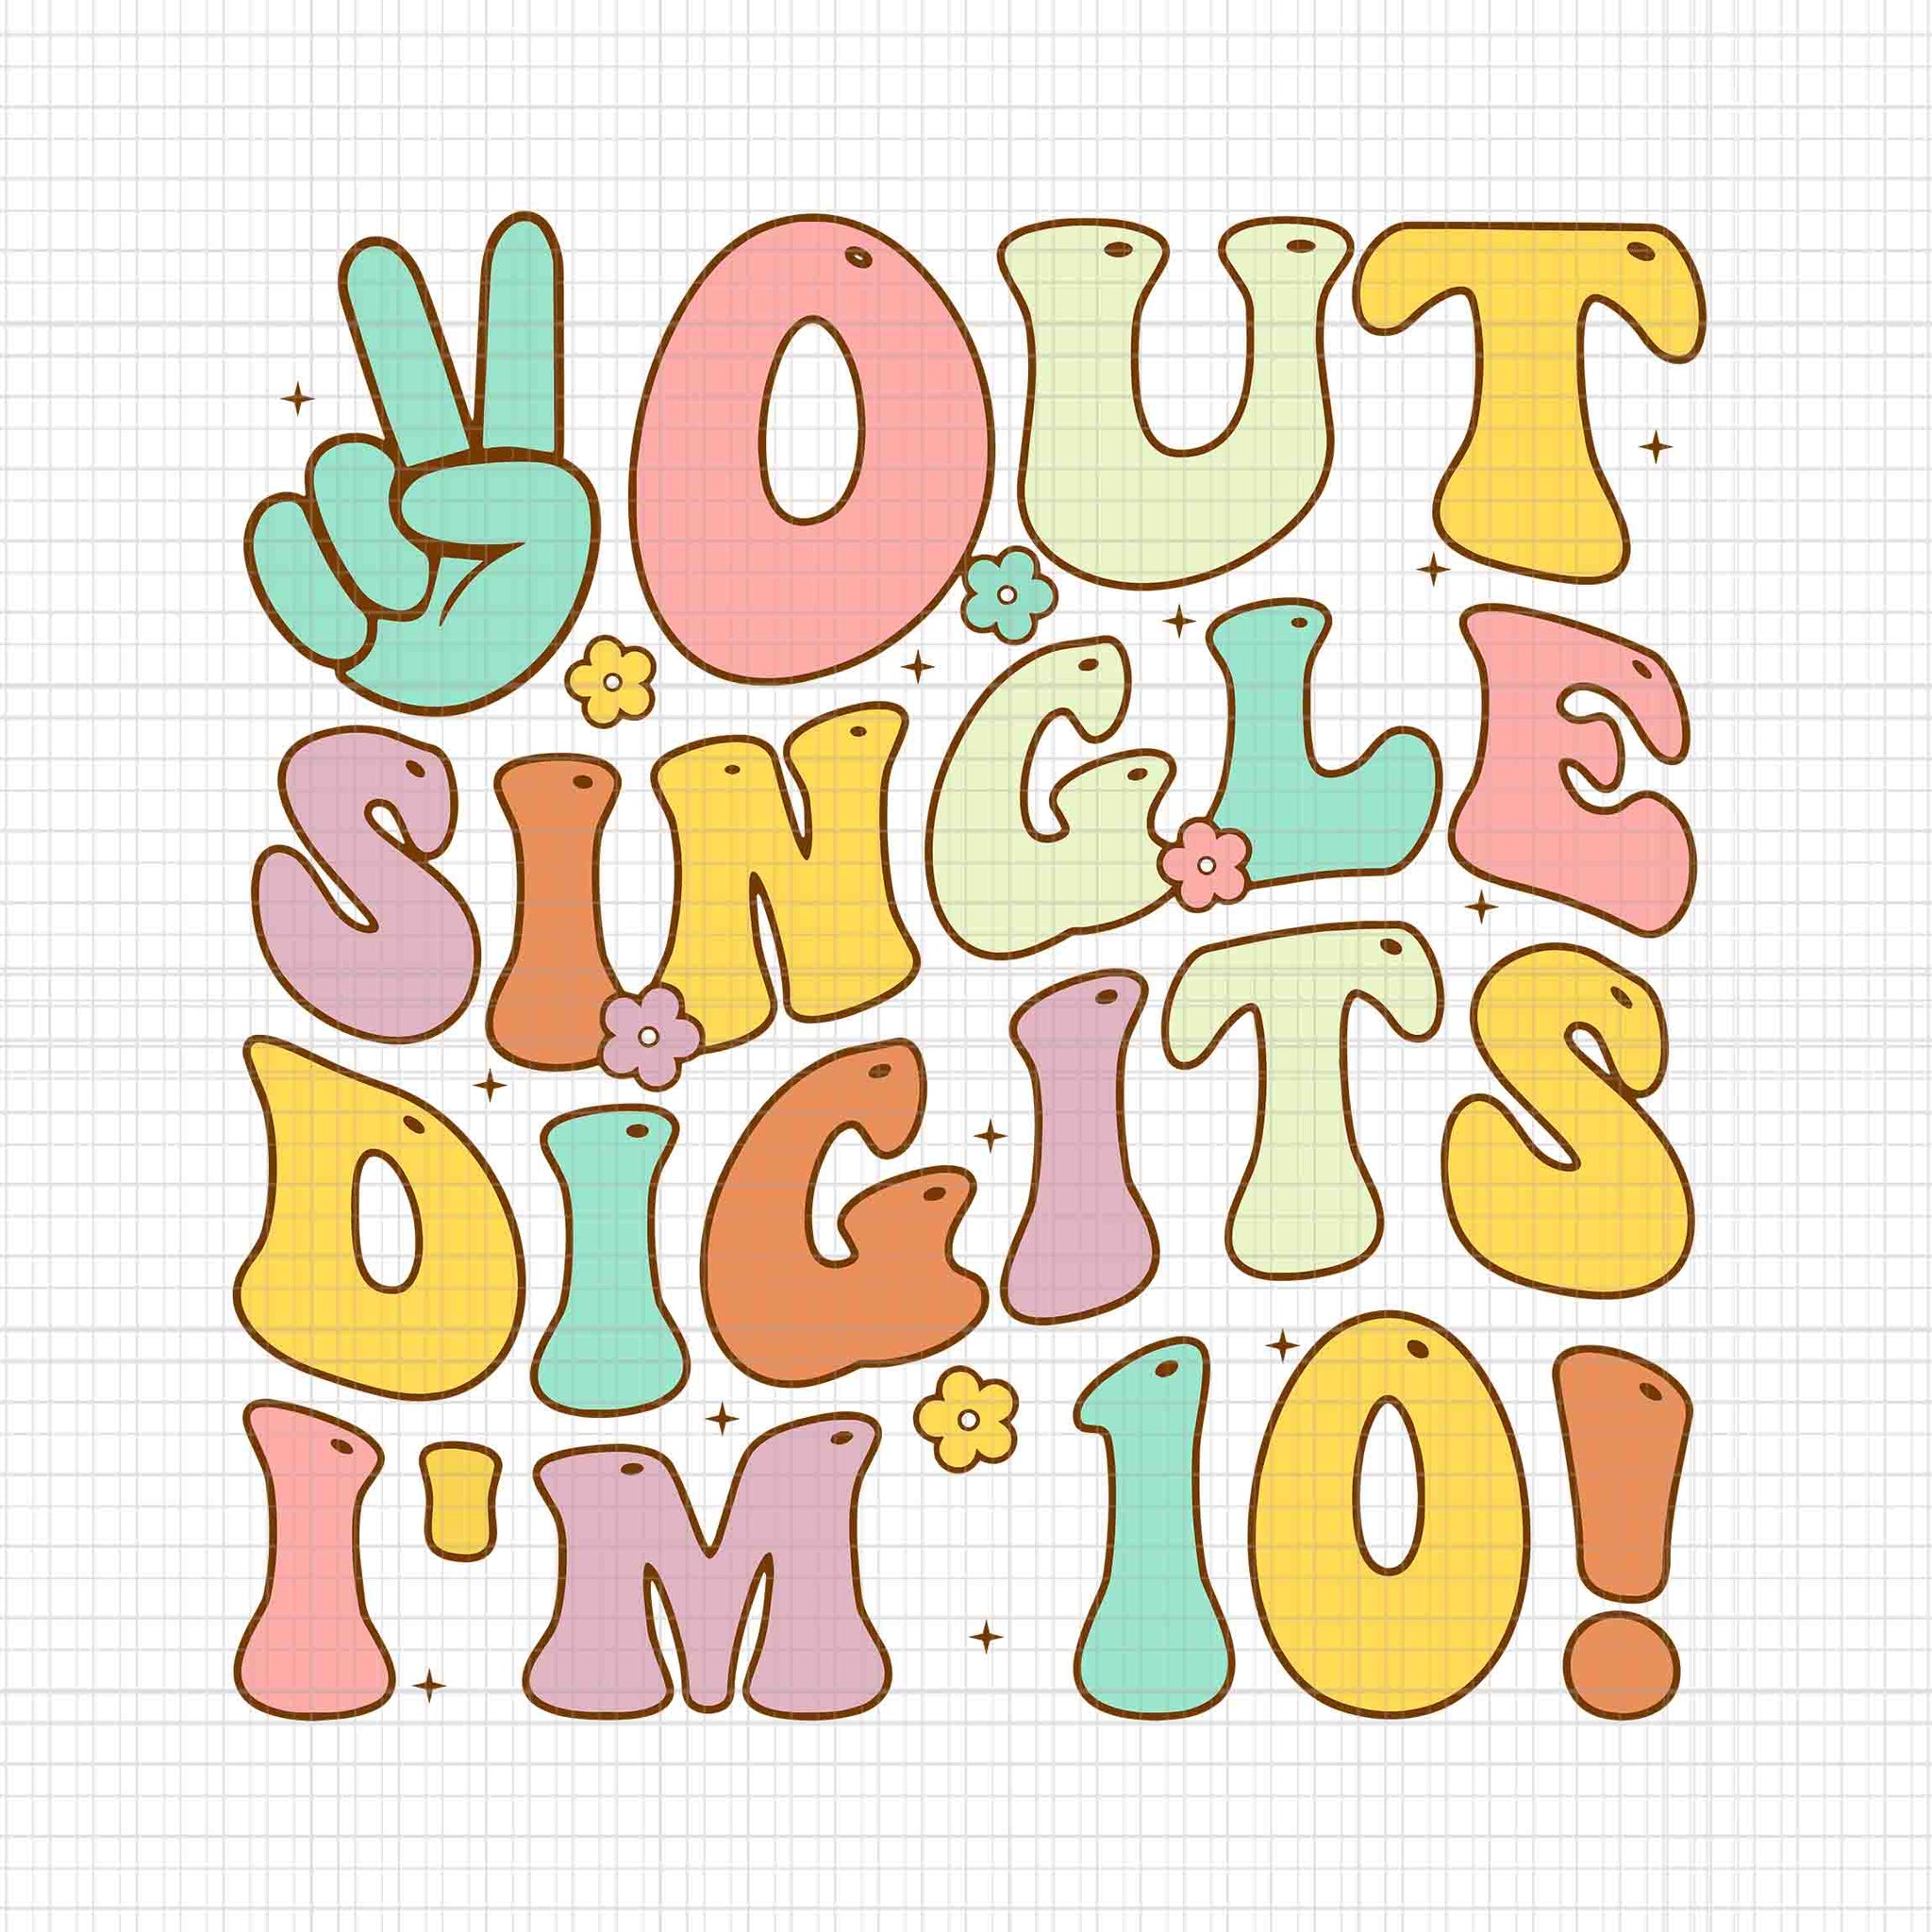 Peace Out Single Digits Retro Groovy 10th Birthday Svg, Peace Out Single Svg, 10th Birthday Svg